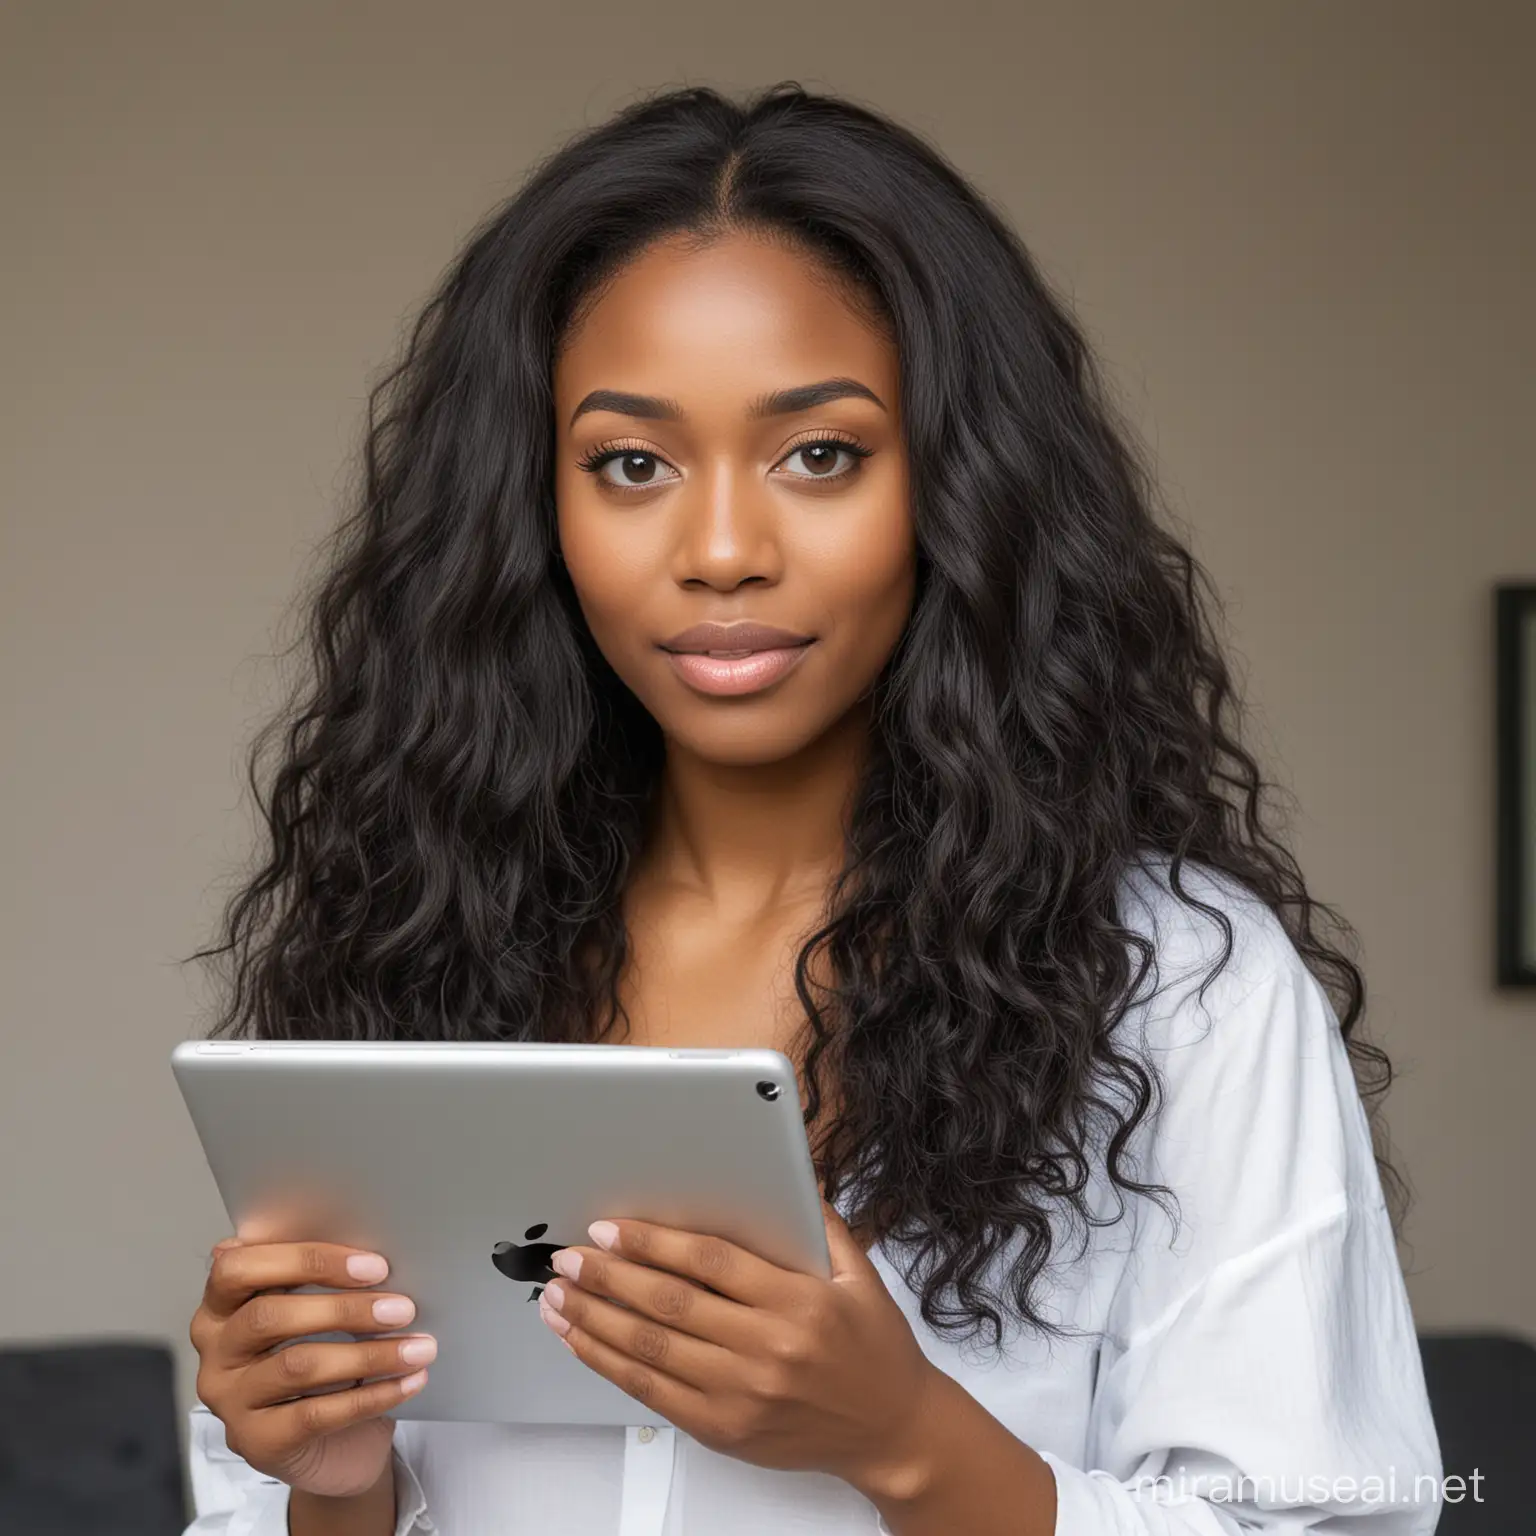 African American Woman with Long Hair Using iPad